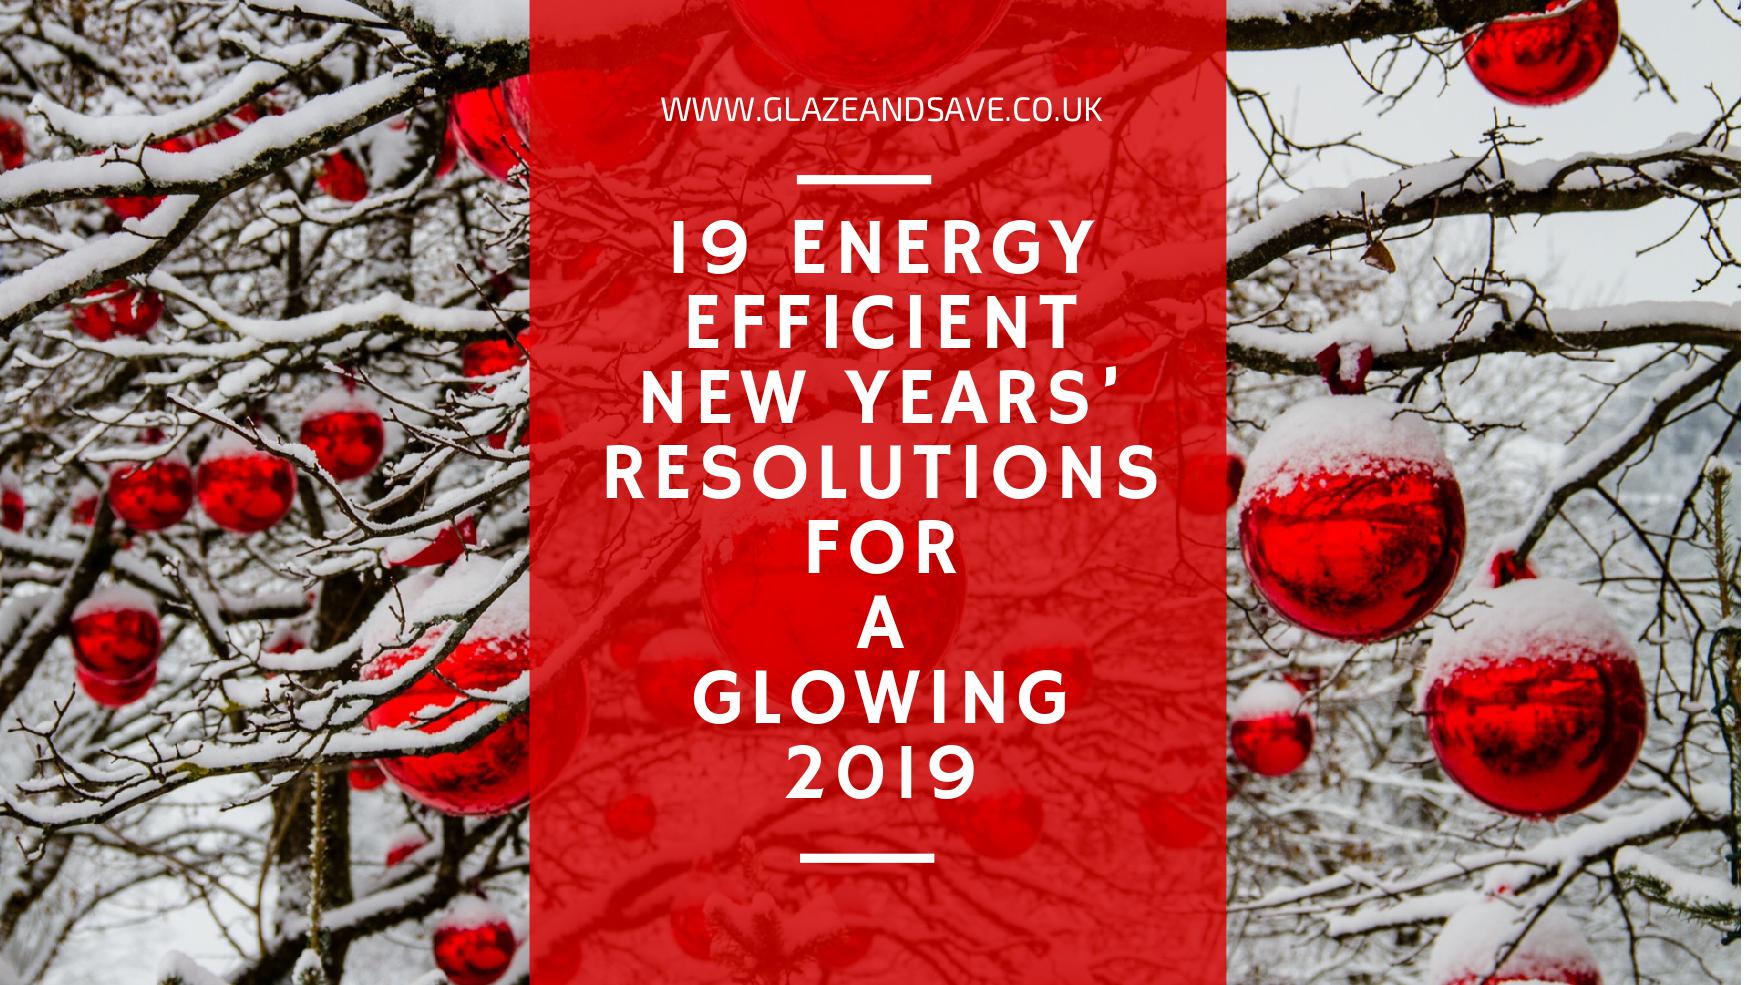 19 Energy Efficient New Years’ Resolutions for a Glowing 2019 by Glaze & Save bespoke magnetic secondary glazing and draught proofing specialists serving the whole of Scotland